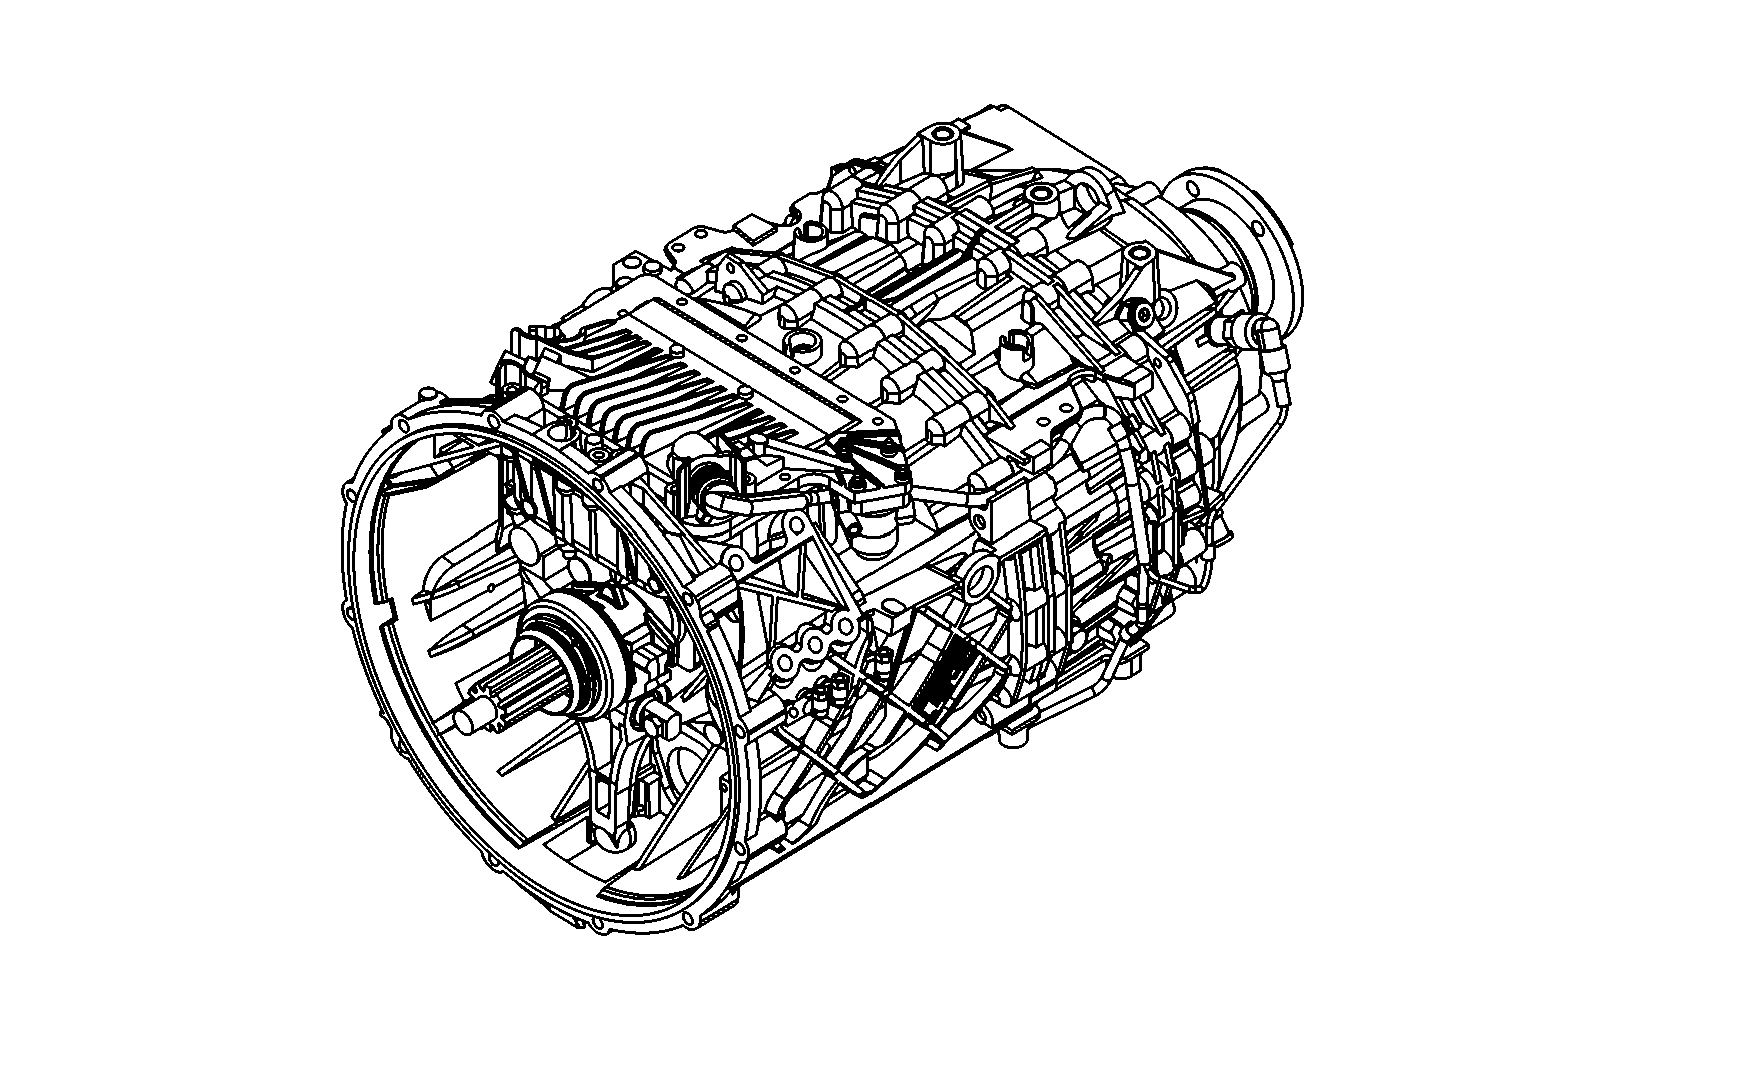 drawing for DAF 1636574 - CONNECTING PARTS (figure 3)